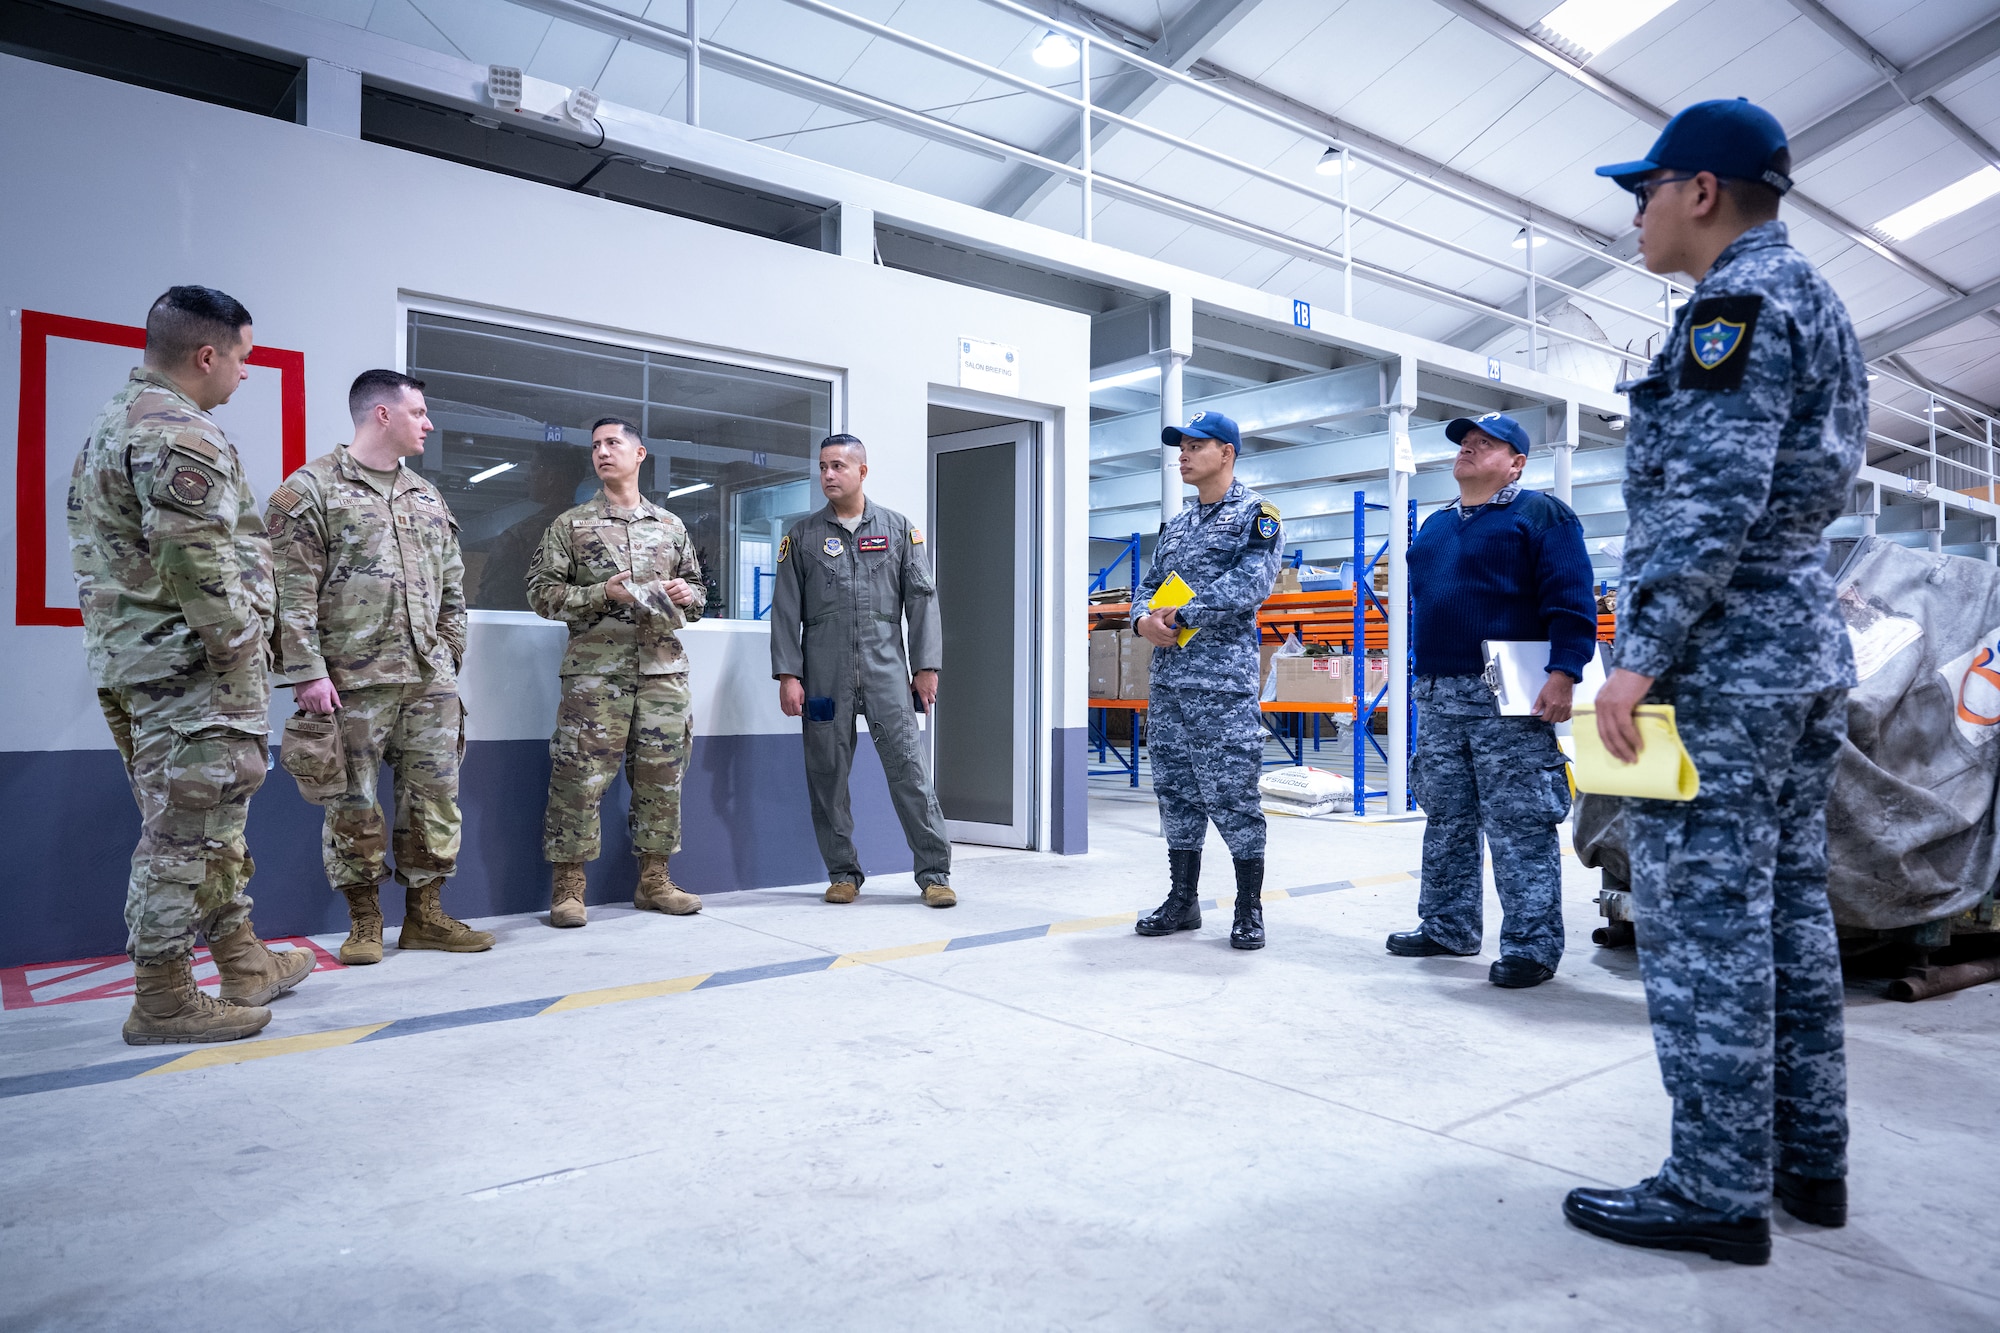 Military service members with the 571st Mobility Support Advisory Squadron and Comando Aéreo Central (CACEN) spoke about similarities and differences between the two Air Force units during a base tour at CACEN “La Aurora” in Guatemala City, Guatemala, Feb. 23, 2024.